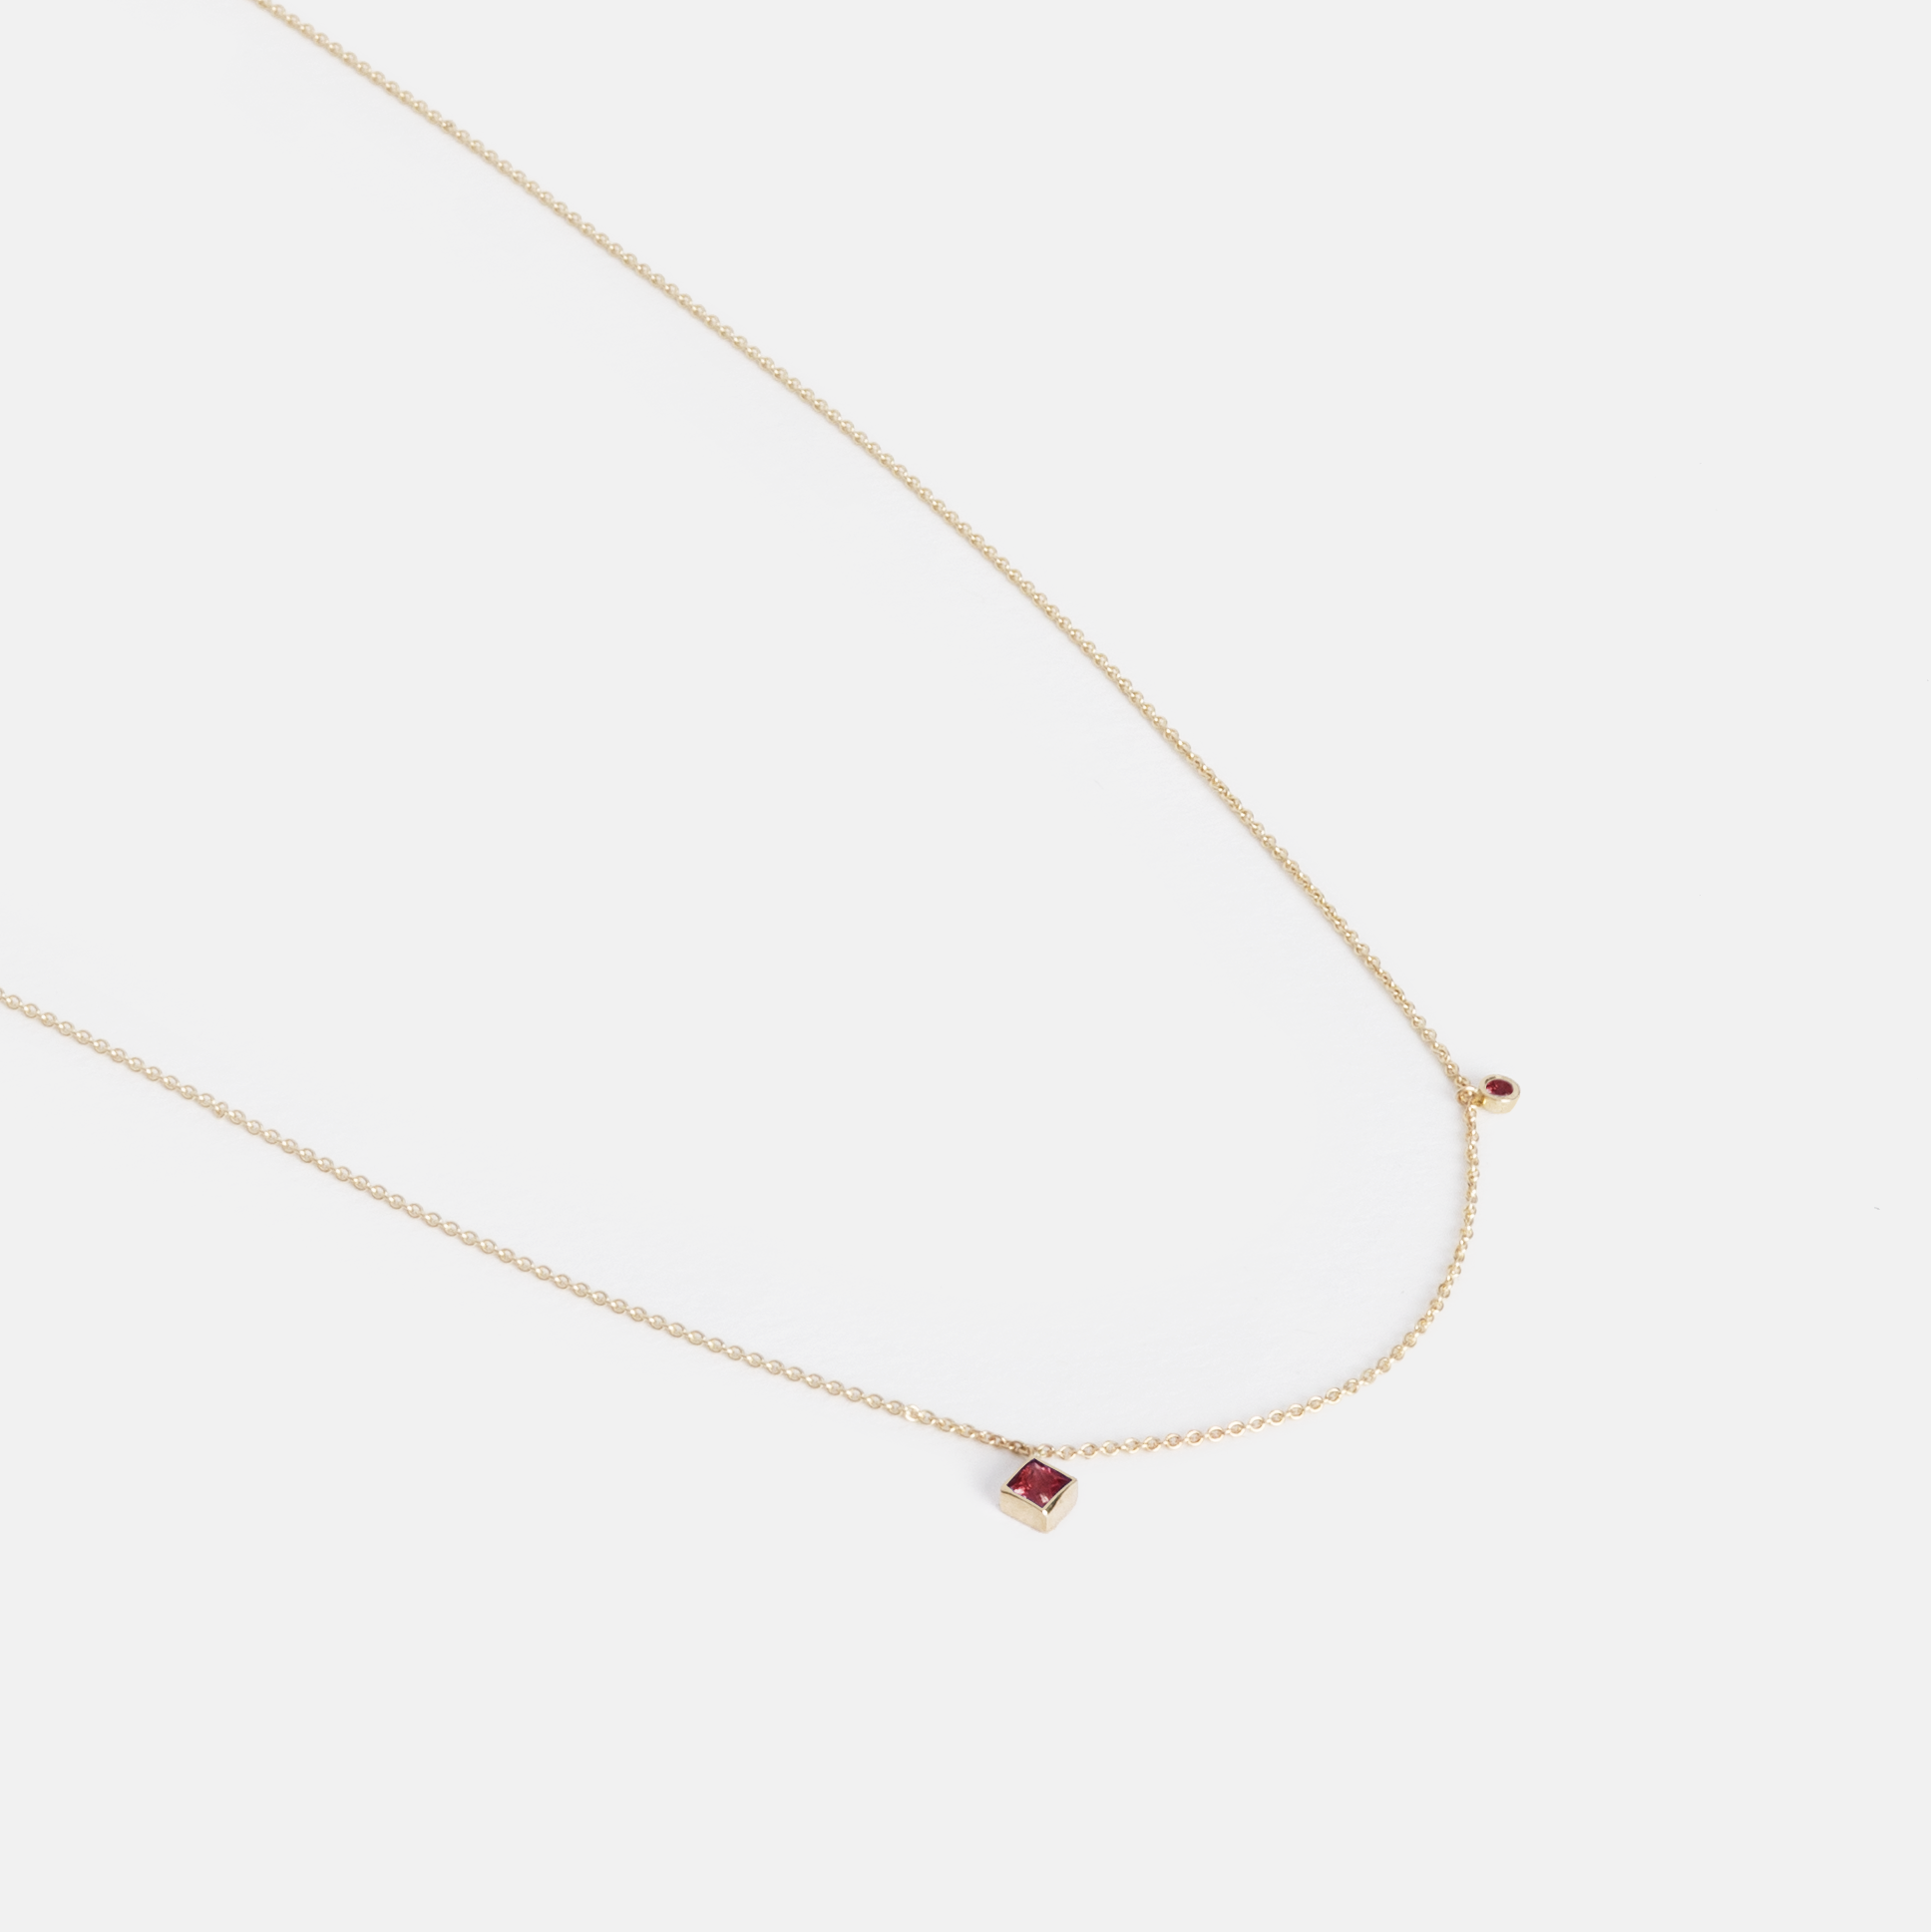 Ibi Delicate Necklace in 14k Gold set with Rubies By SHW Fine Jewelry NYC